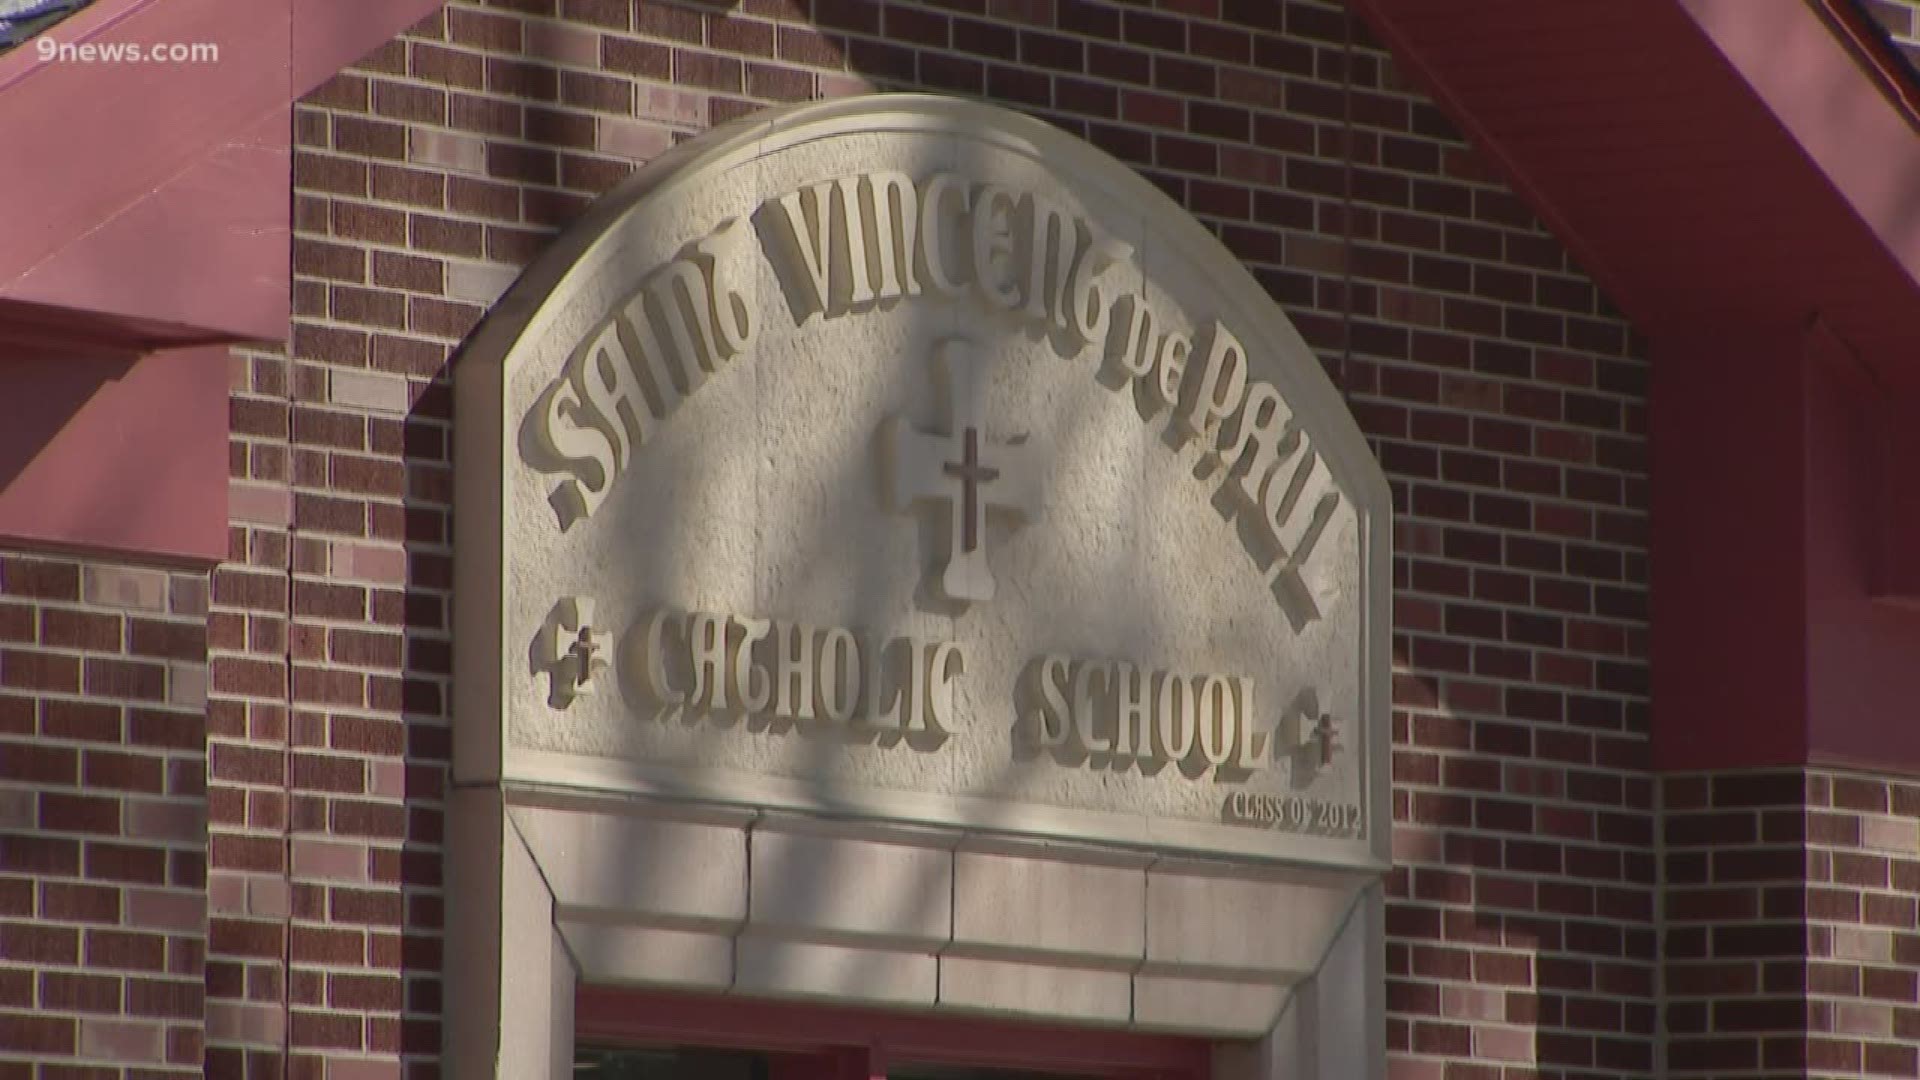 A 33 page complaint alleges that a pastor at St. Vincent De Paul School misused funds that should have gone to kids in need.